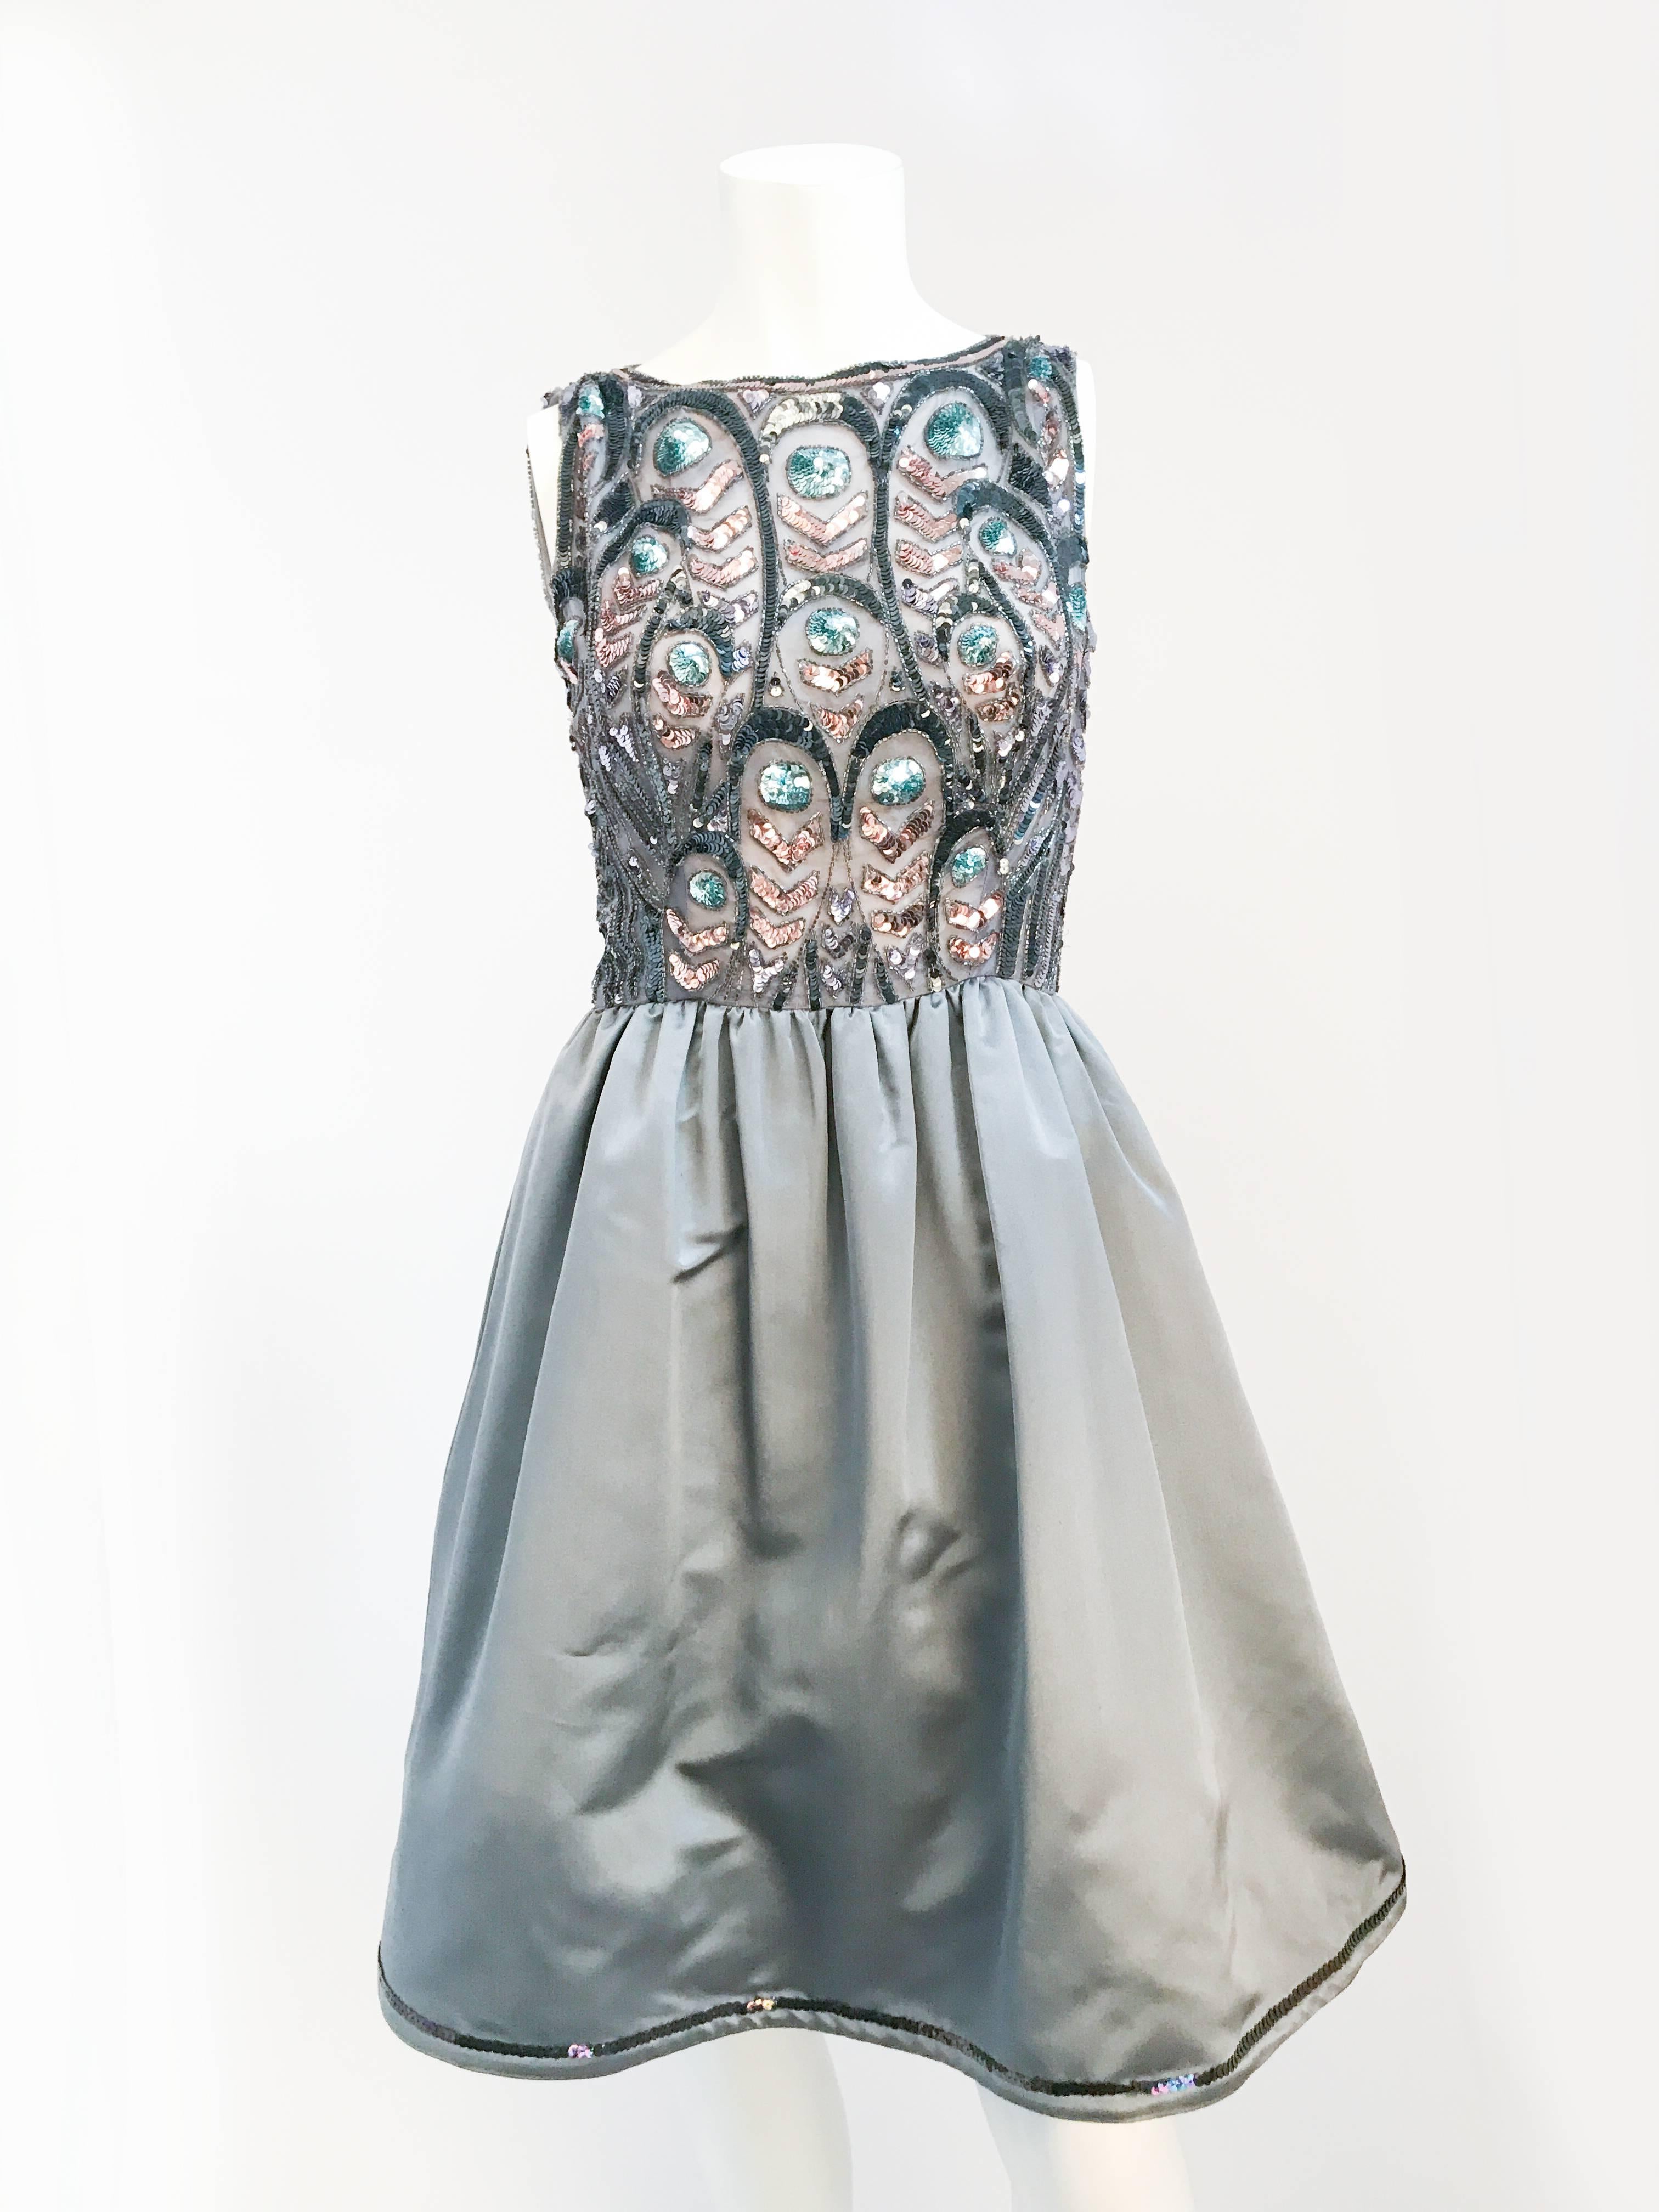 1950s Grey Sequin Cocktail Dress. Grey silk satin sleeveless cocktail dress with multicolored sequin and matching sash. Metal zipper closure located on the back of the dress. 